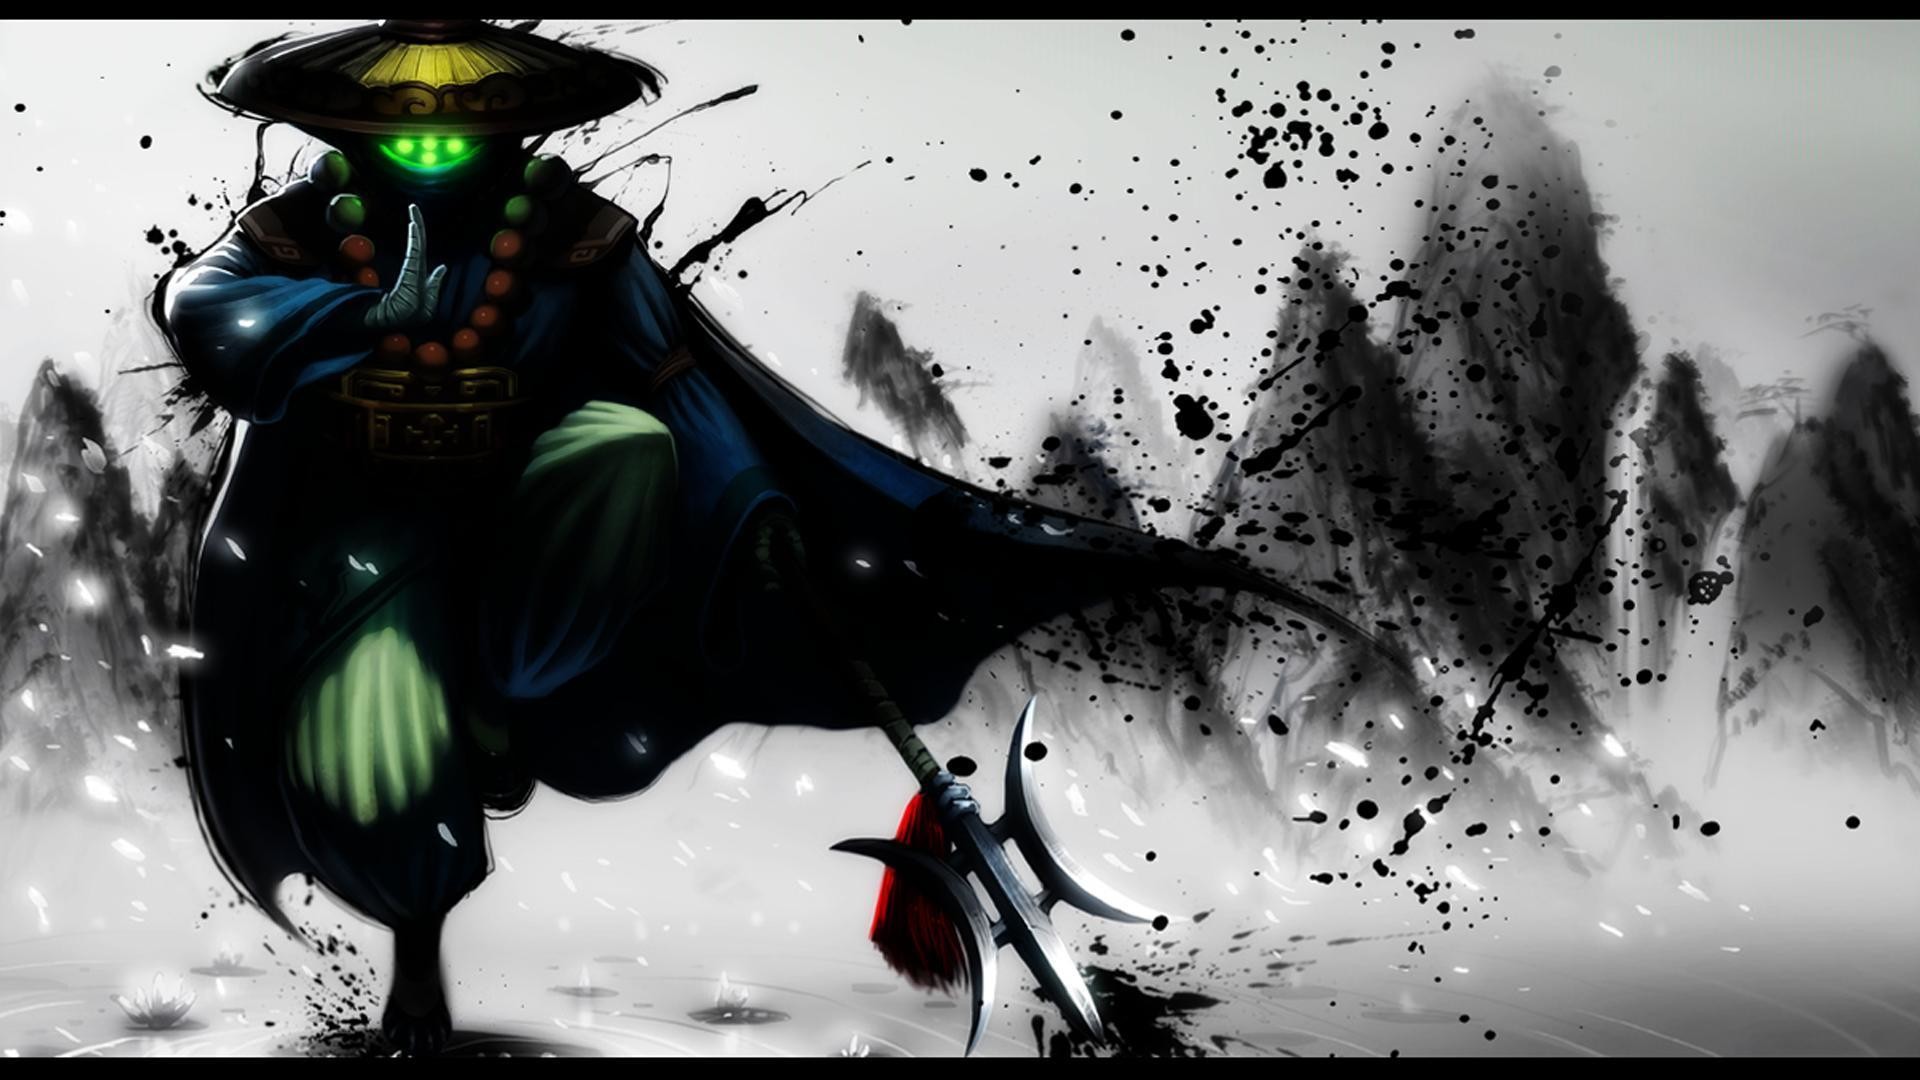 1920x1080 Jax LOL Wallpaper 70631 Images HD Wallpapers| Wallpapers & Backgrounds